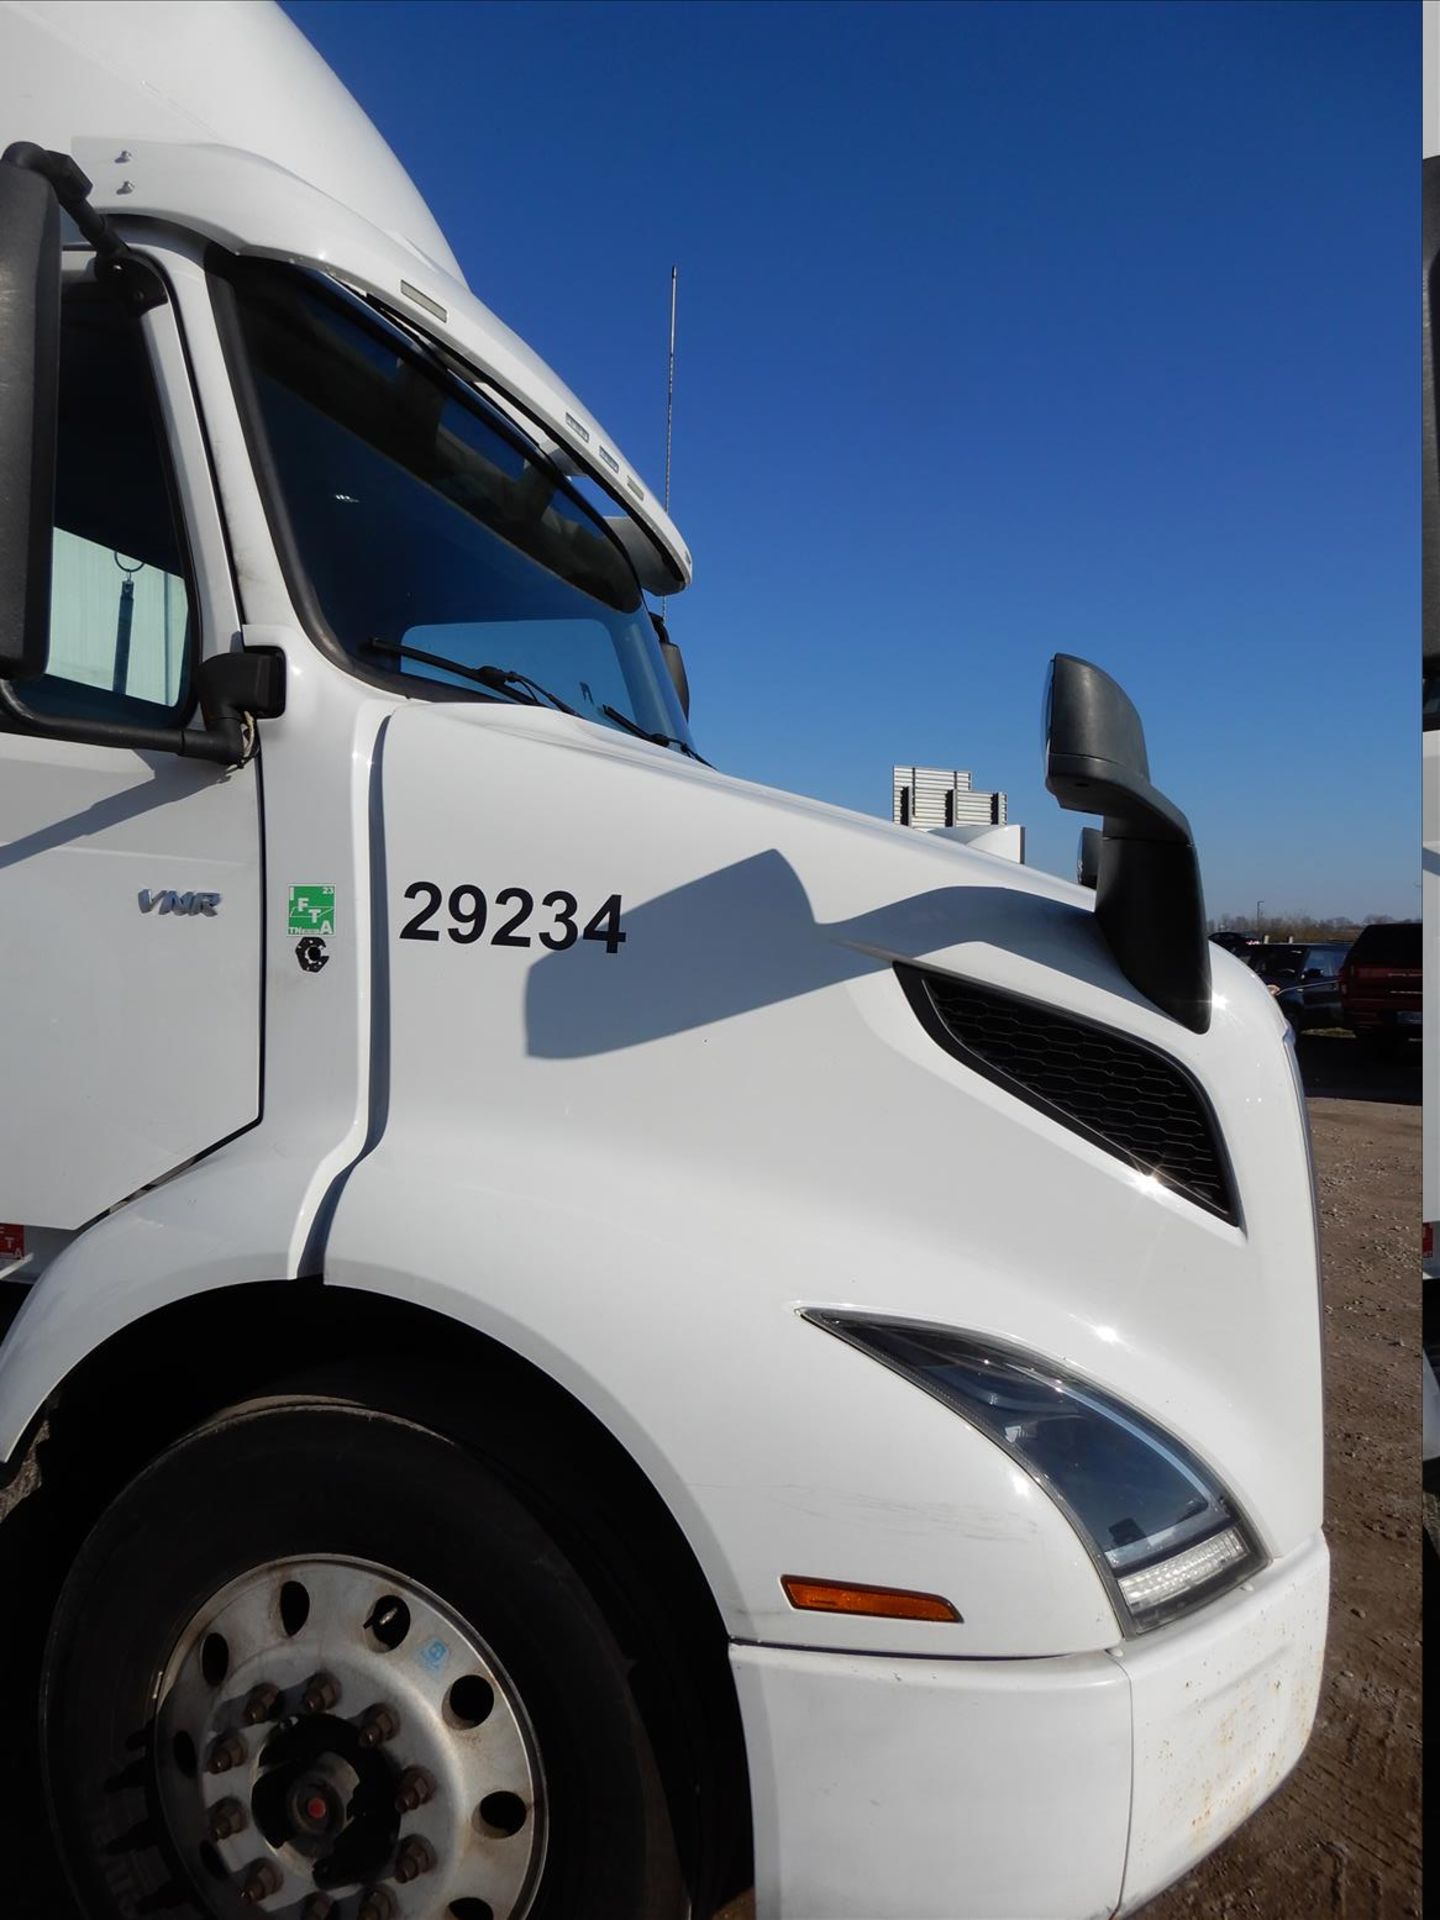 2019 Volvo VNR 300 Daycab Truck Tractor - Located in Indianapolis, IN - Image 27 of 61